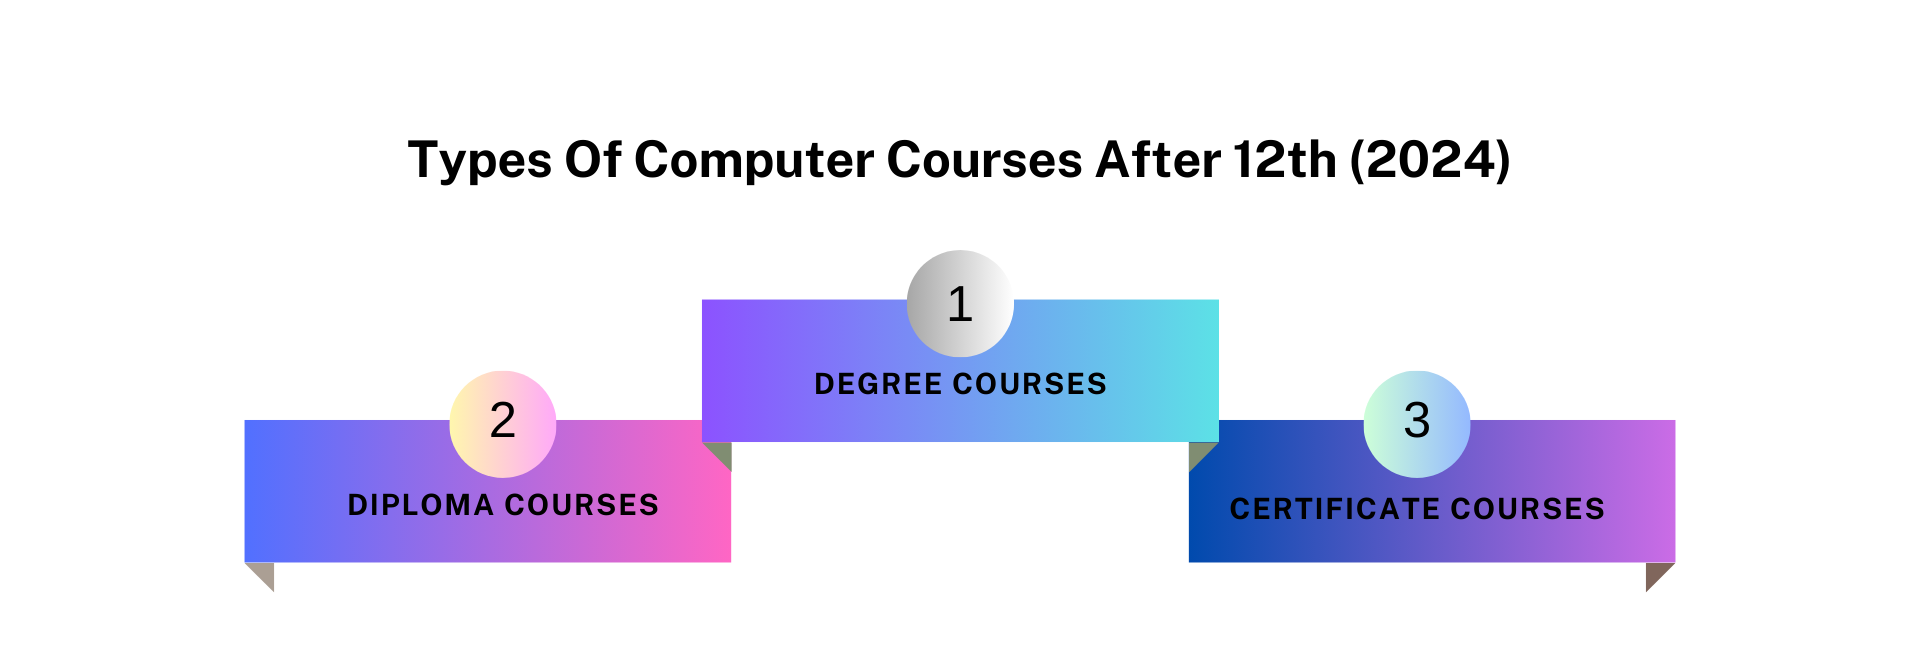 Best Computer Courses After 12th Class (2024)